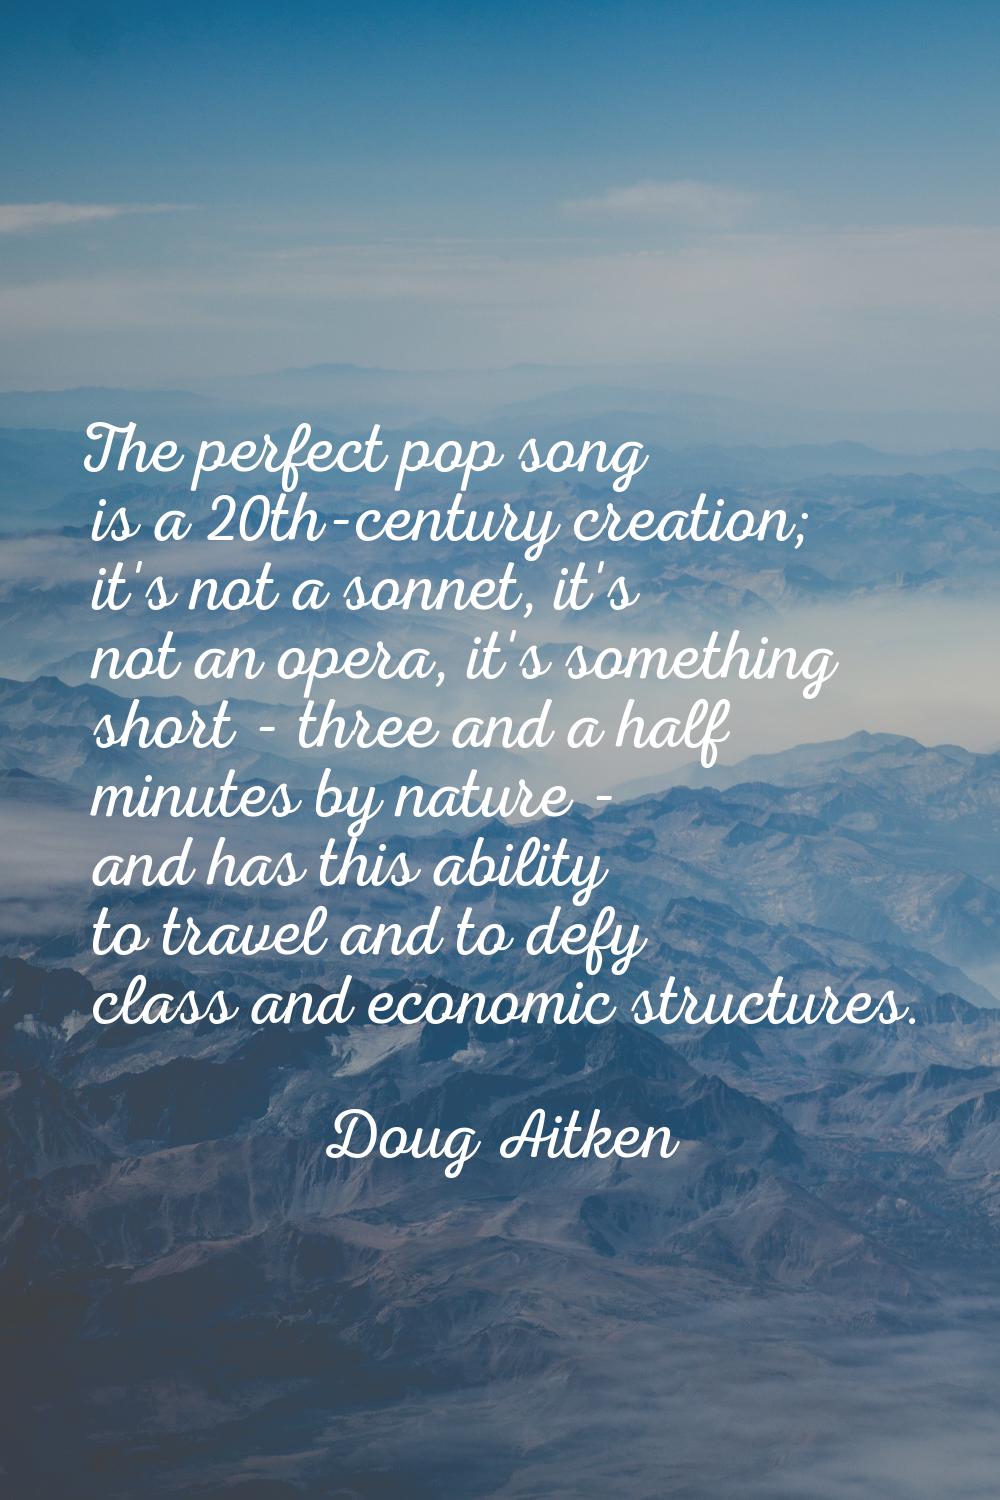 The perfect pop song is a 20th-century creation; it's not a sonnet, it's not an opera, it's somethi